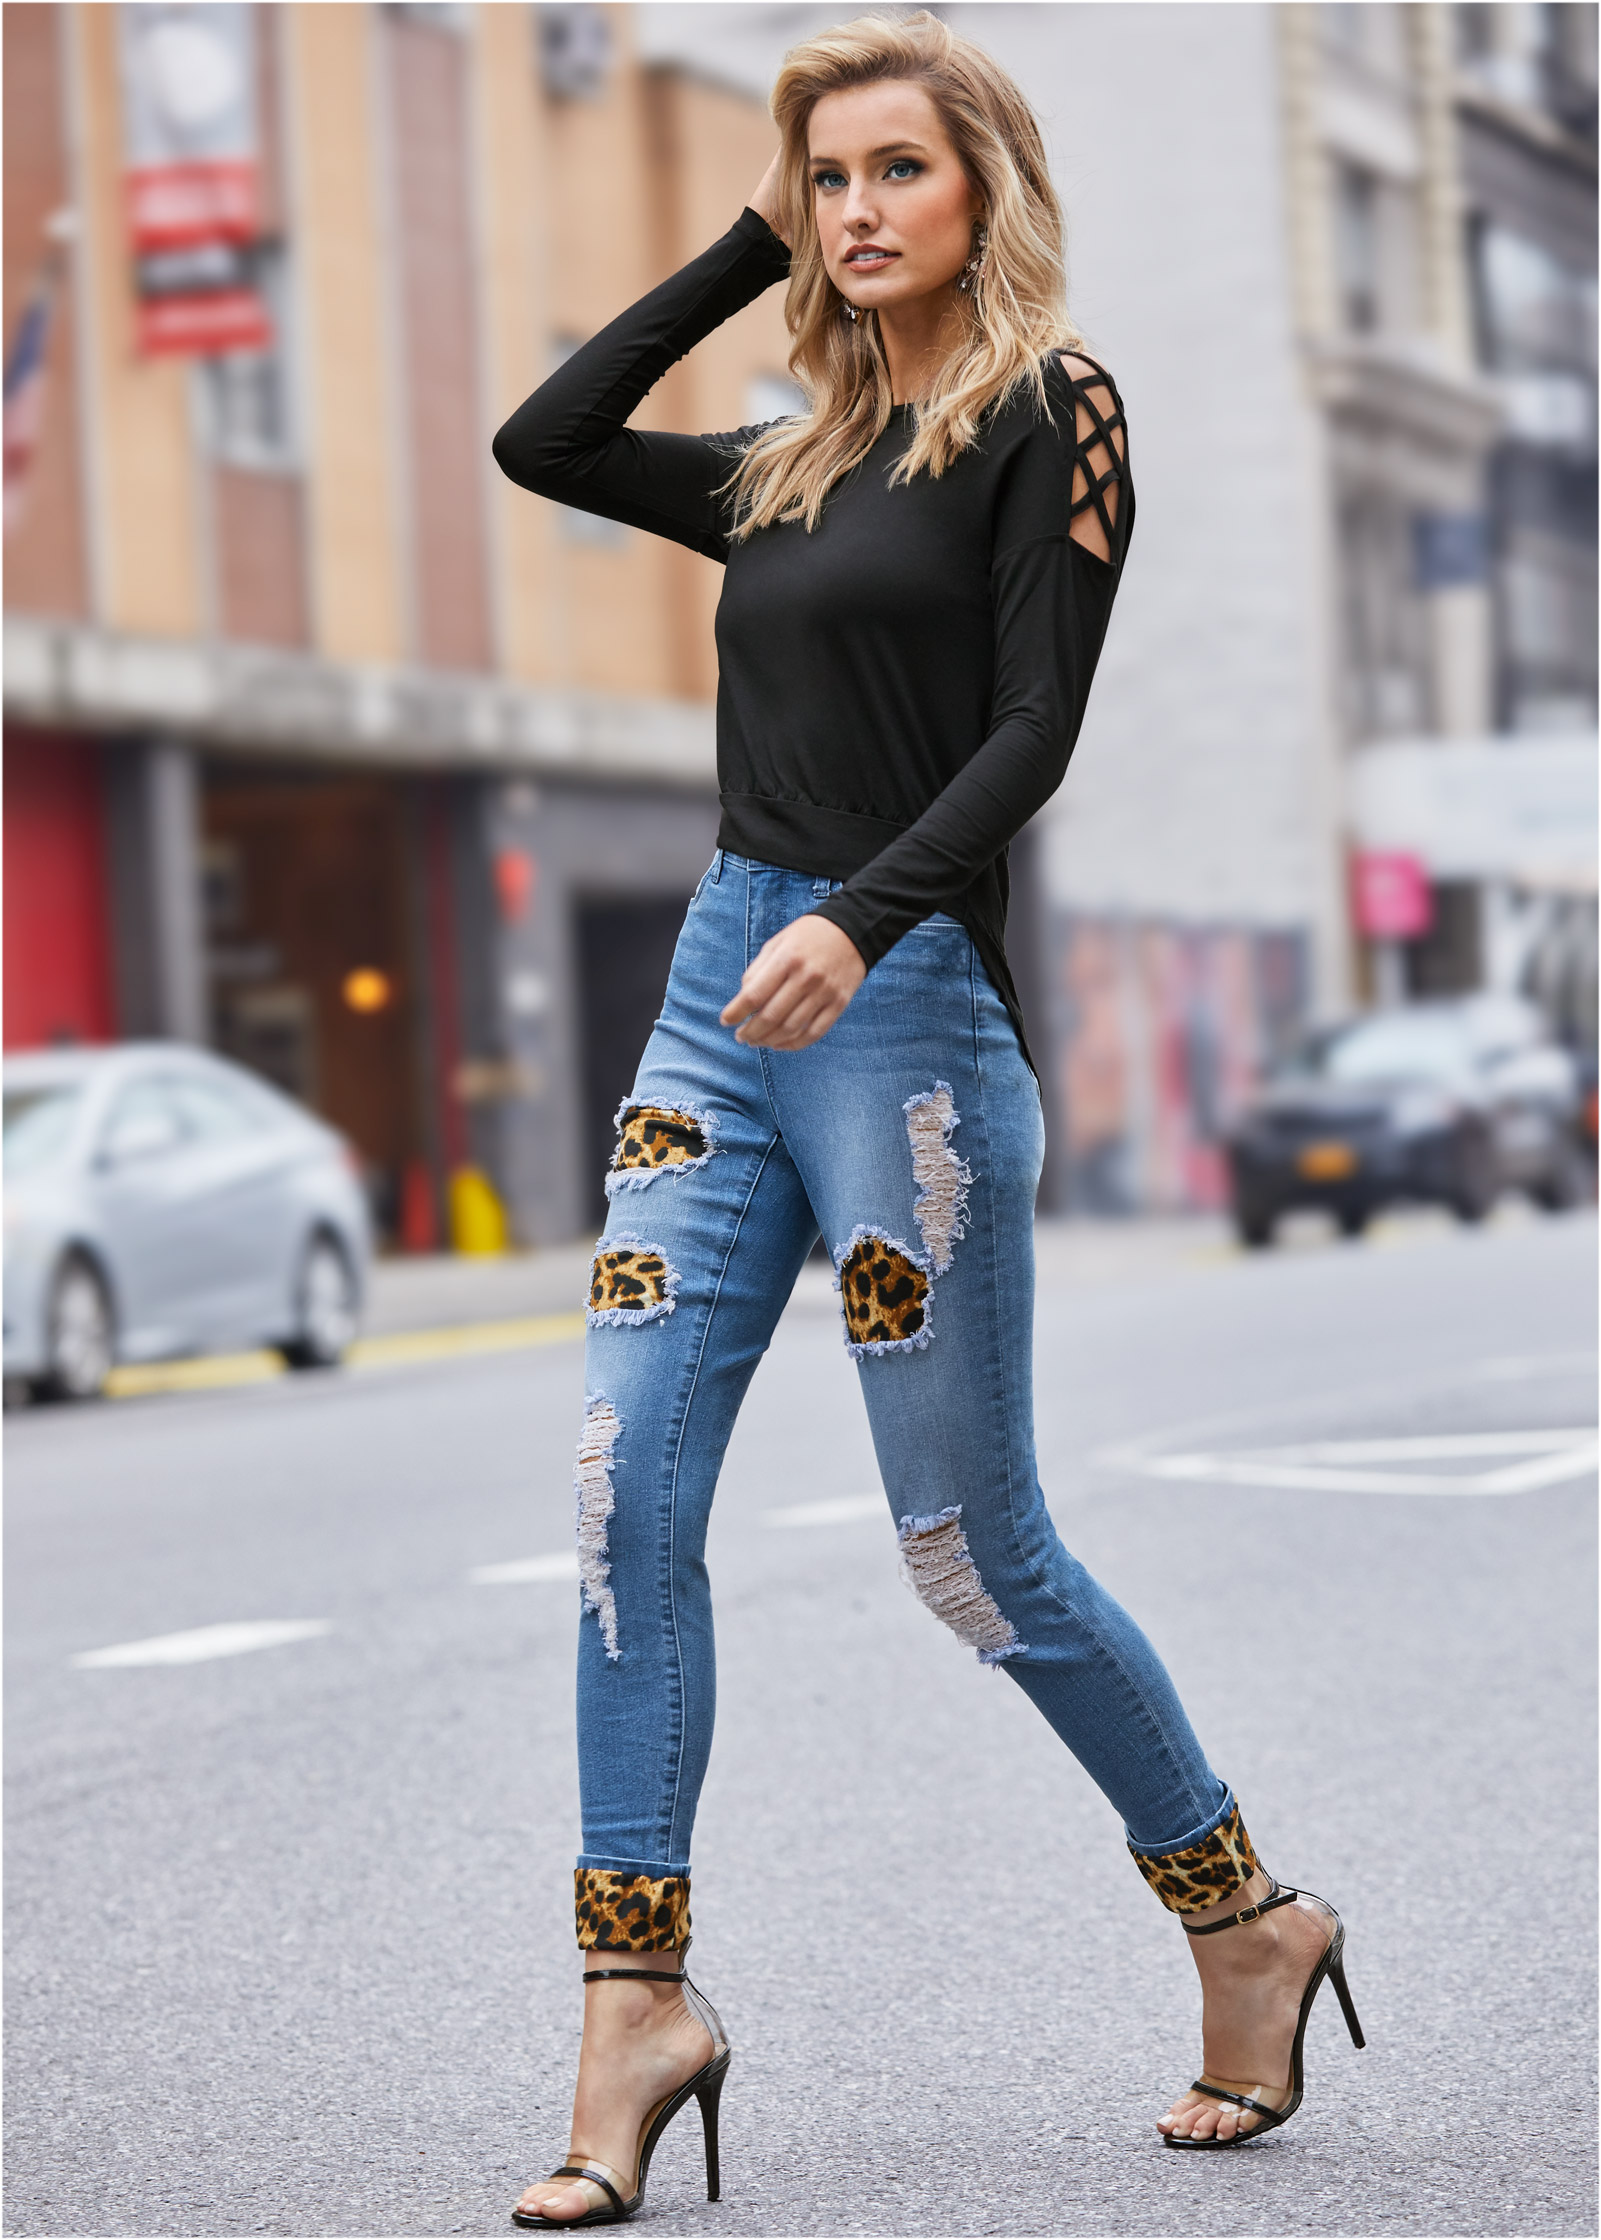 leopard print top and jeans